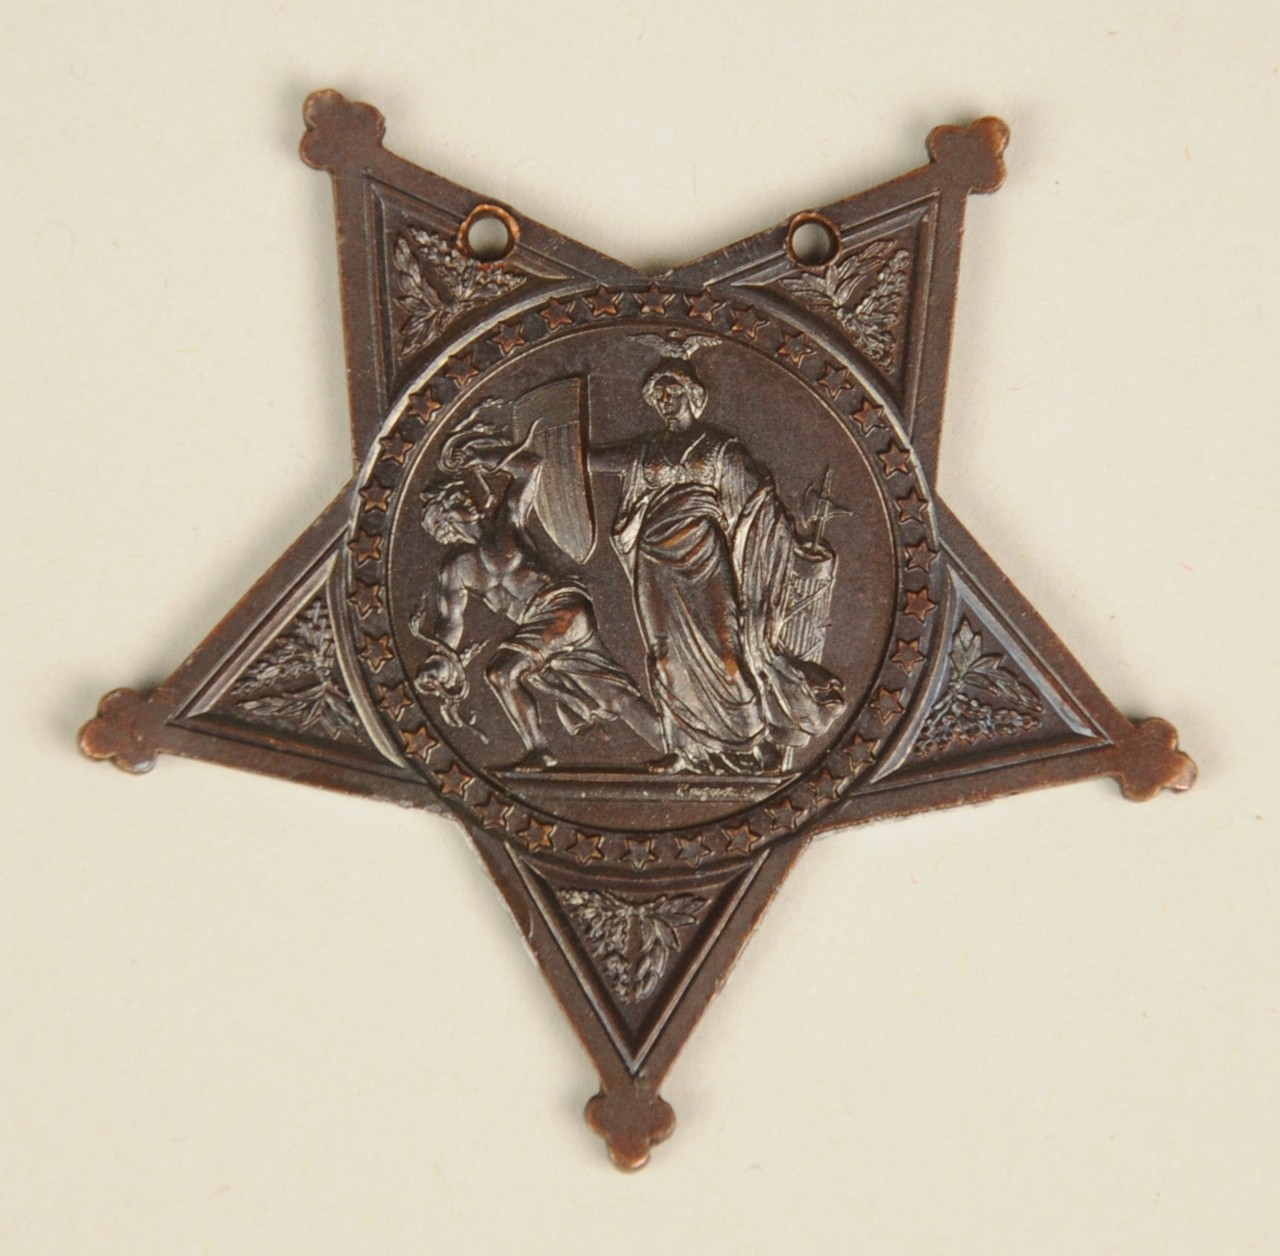 Obverse of Civil War Era Navy medal of honor five pointed star